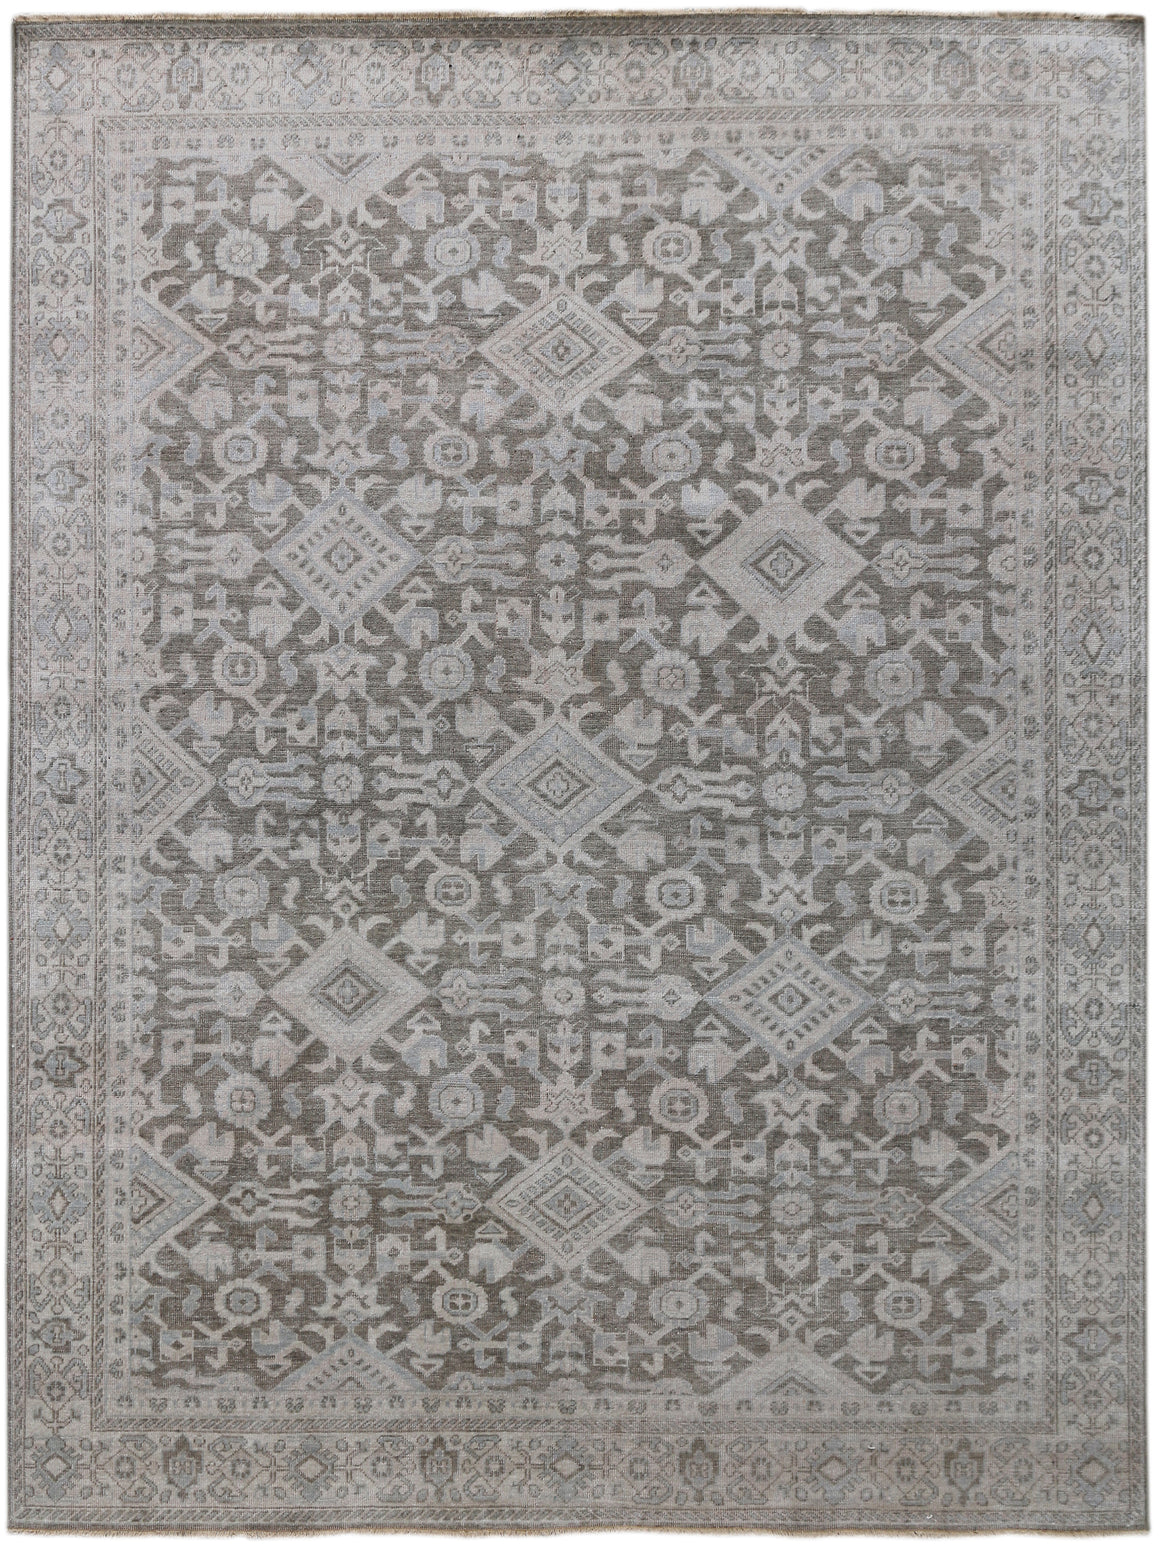 Sallena Traditional Design Hand Knotted Rug 9'x12'